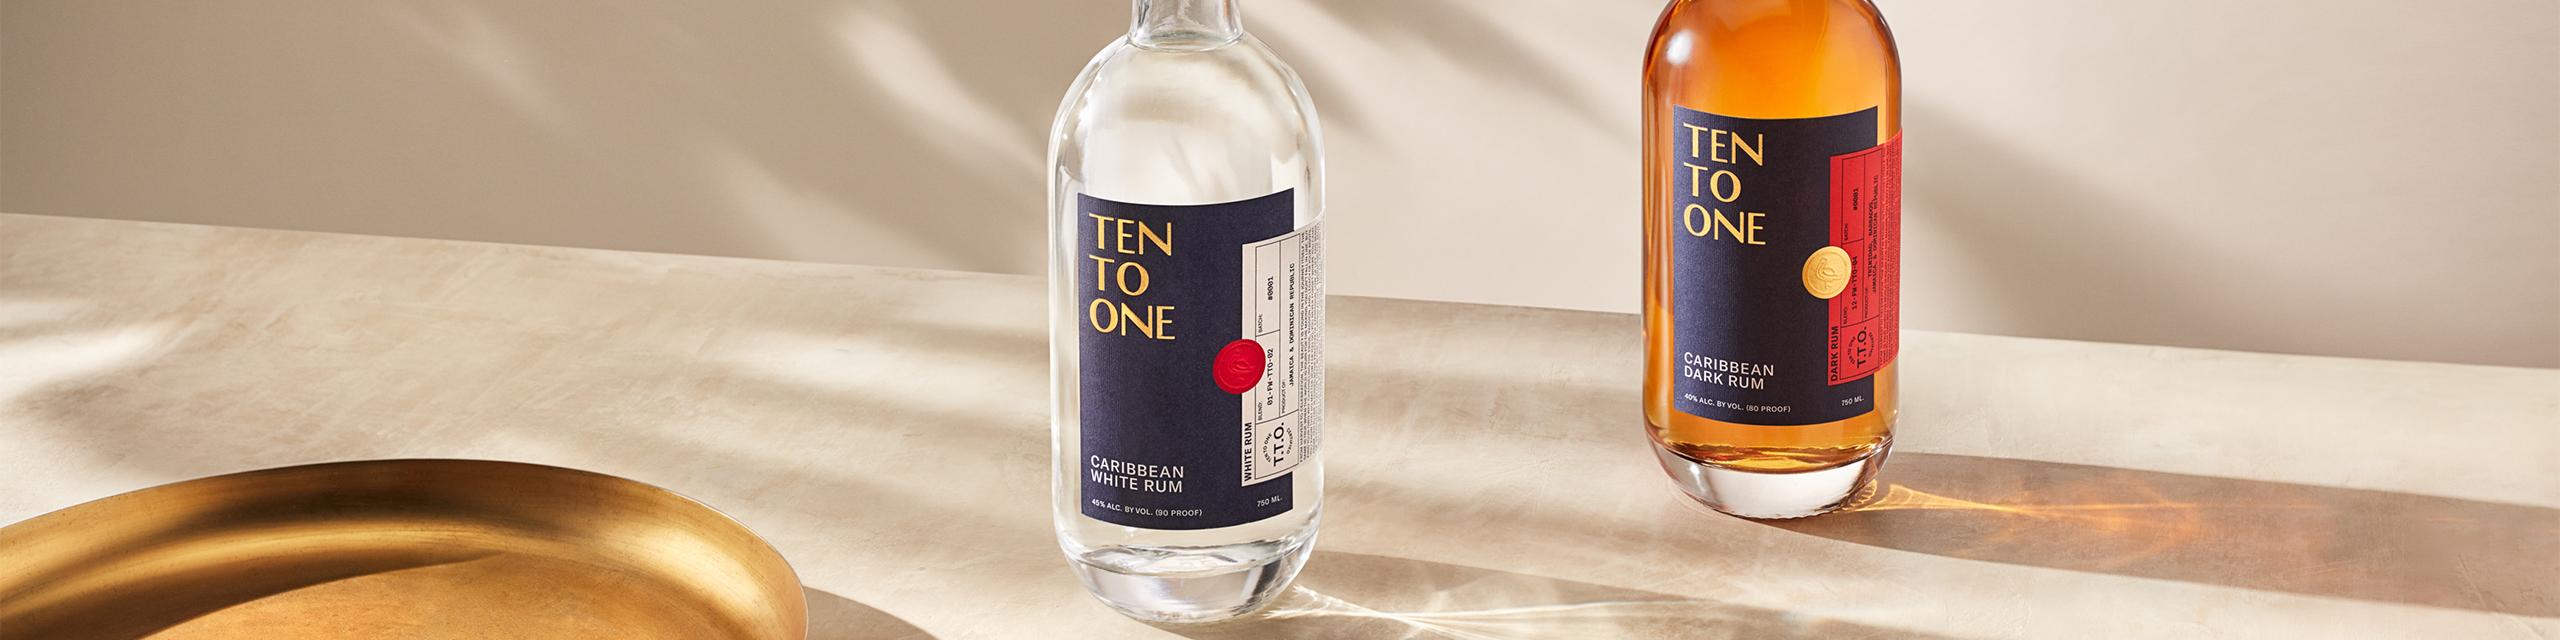 Ten To One Rum is a contemporary and elevated blend, designed to challenge expectations and reinvigorate the way people taste, experience, and talk about rum. Ten To One is guided by the freedom of expression, love of life, and sense of individuality that live deep within our Caribbean DNA. Embracing the belief that the beauty in the blend is what makes us unique, and celebrating the collective spirit shared by those who create their own calling. The beauty is in the blend.